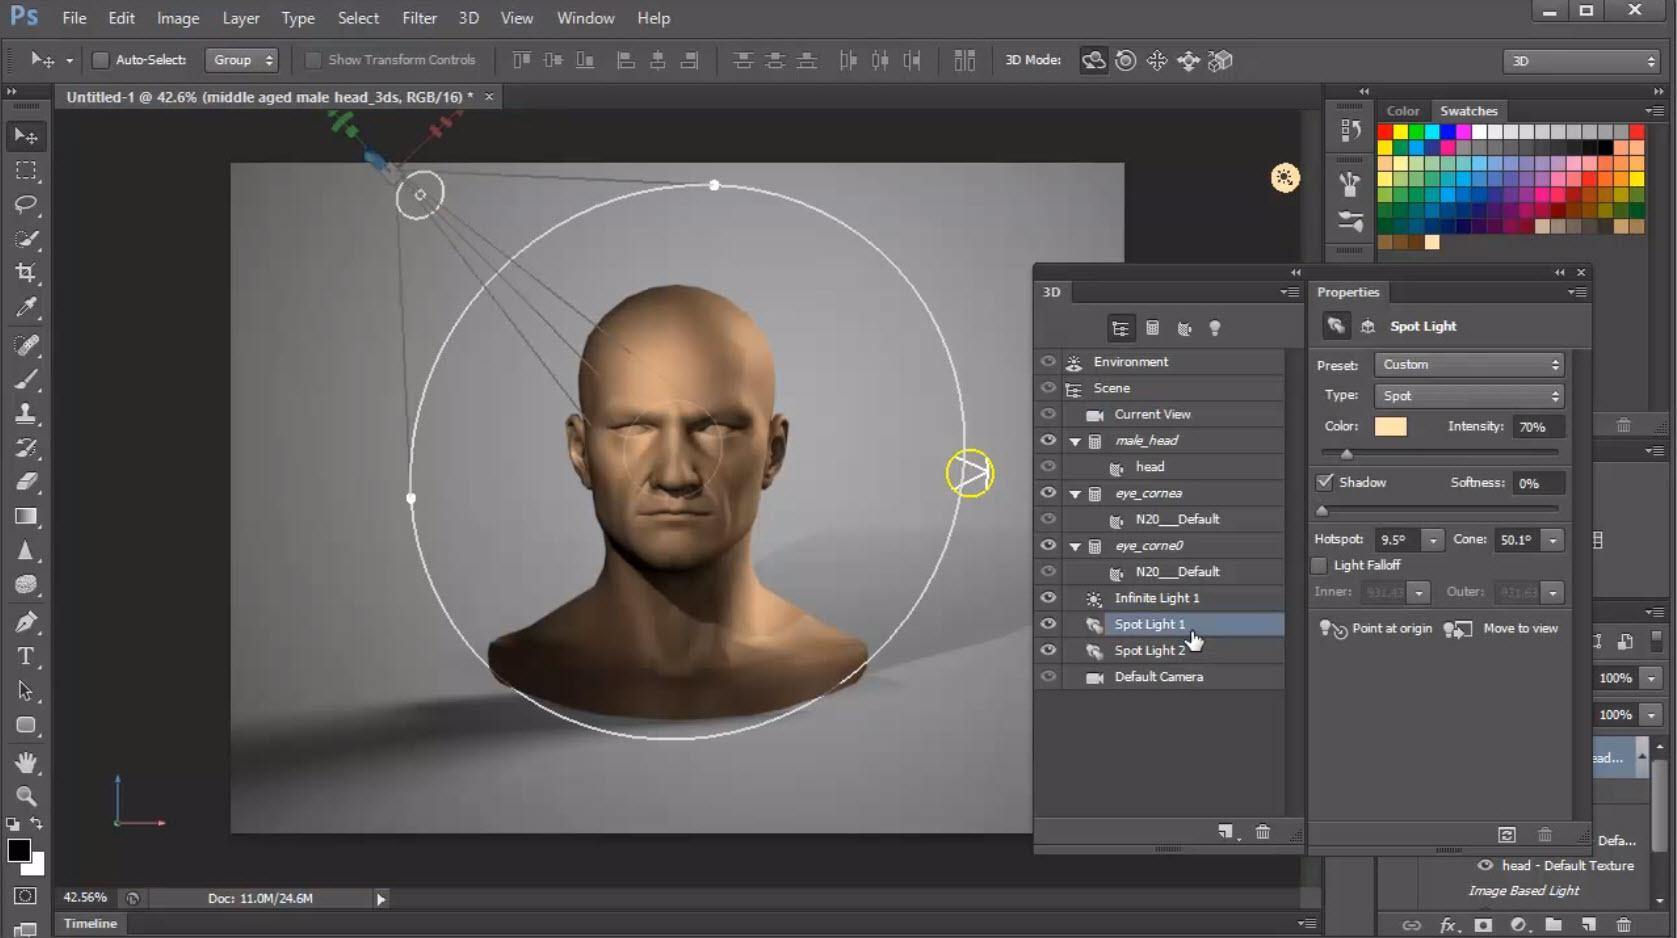 Adobe Adds New 3D Printing Features to CC With